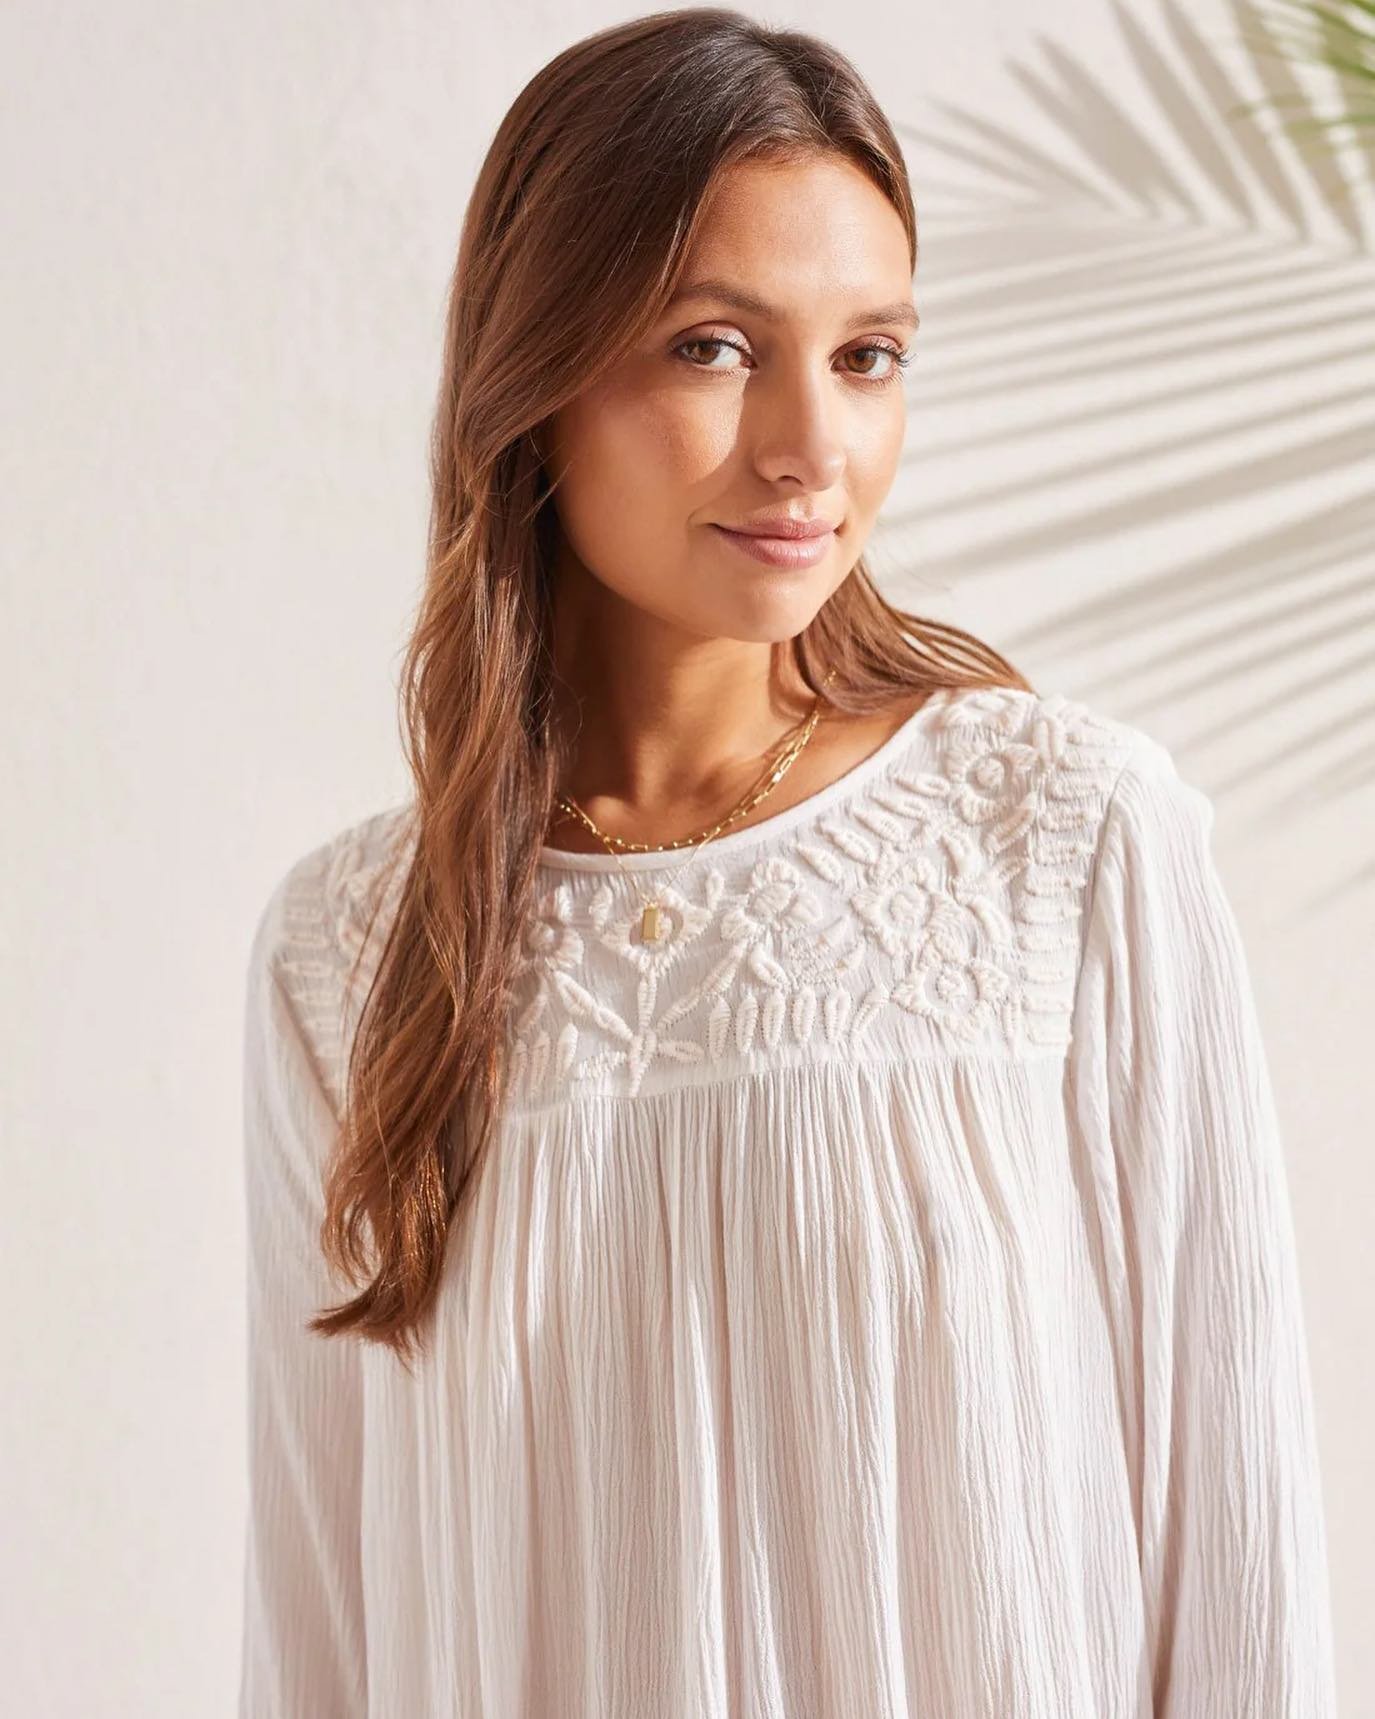 This crepe fabric flowy drape blouse gives you that feminine feel! 😍
.
.
.
.
.
.
#fairfieldcounty #fairfieldct #fairfieldmoms #westportmoms #boutiquestyle #shopsmall #womenowned #cashmere #sweater #fallstyle #accessories #fairfielduniversity #sacred